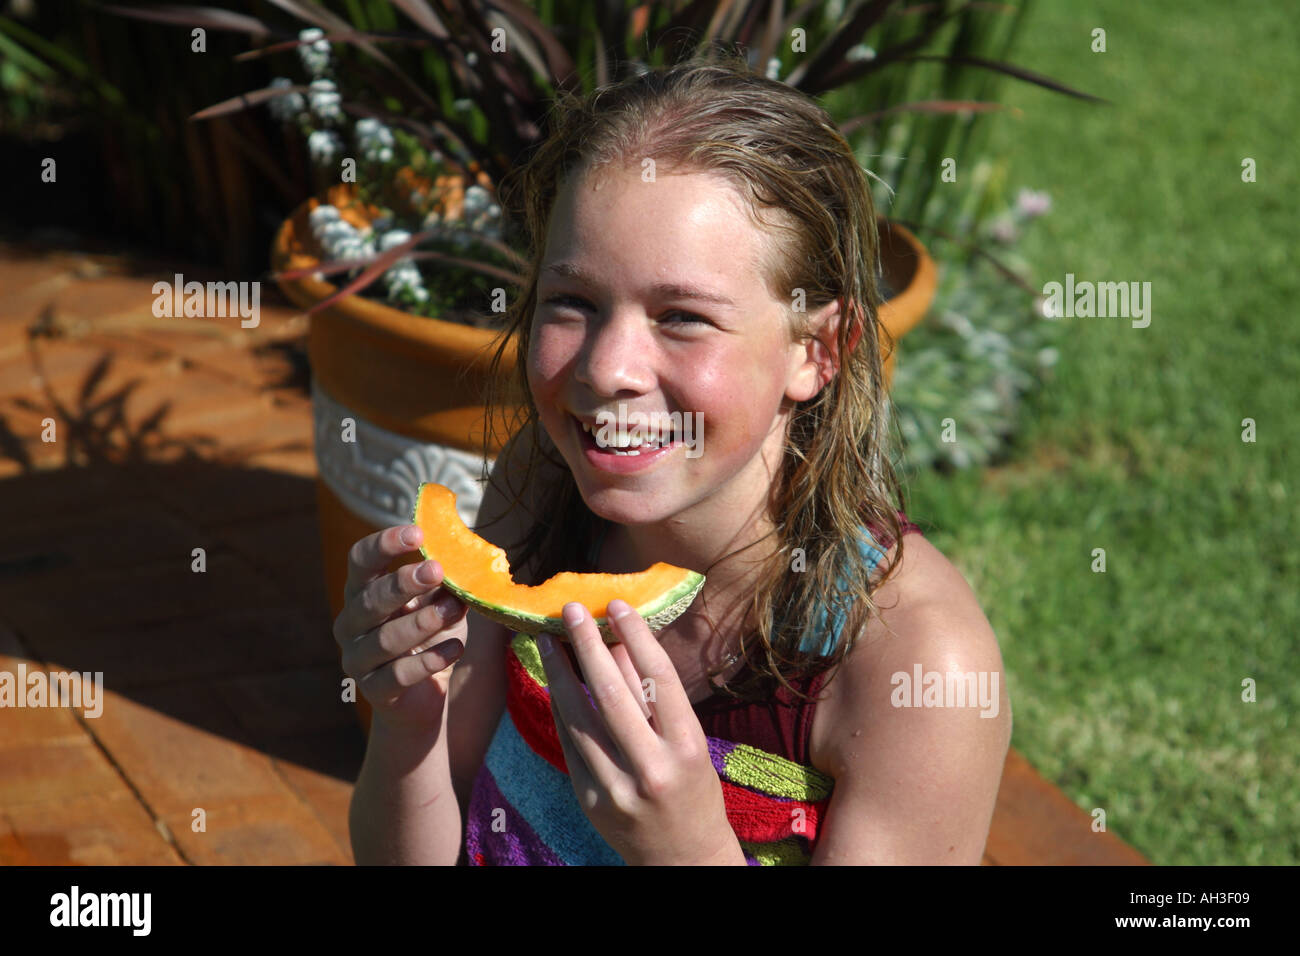 beautiful young girl eating melon slice Stock Photo